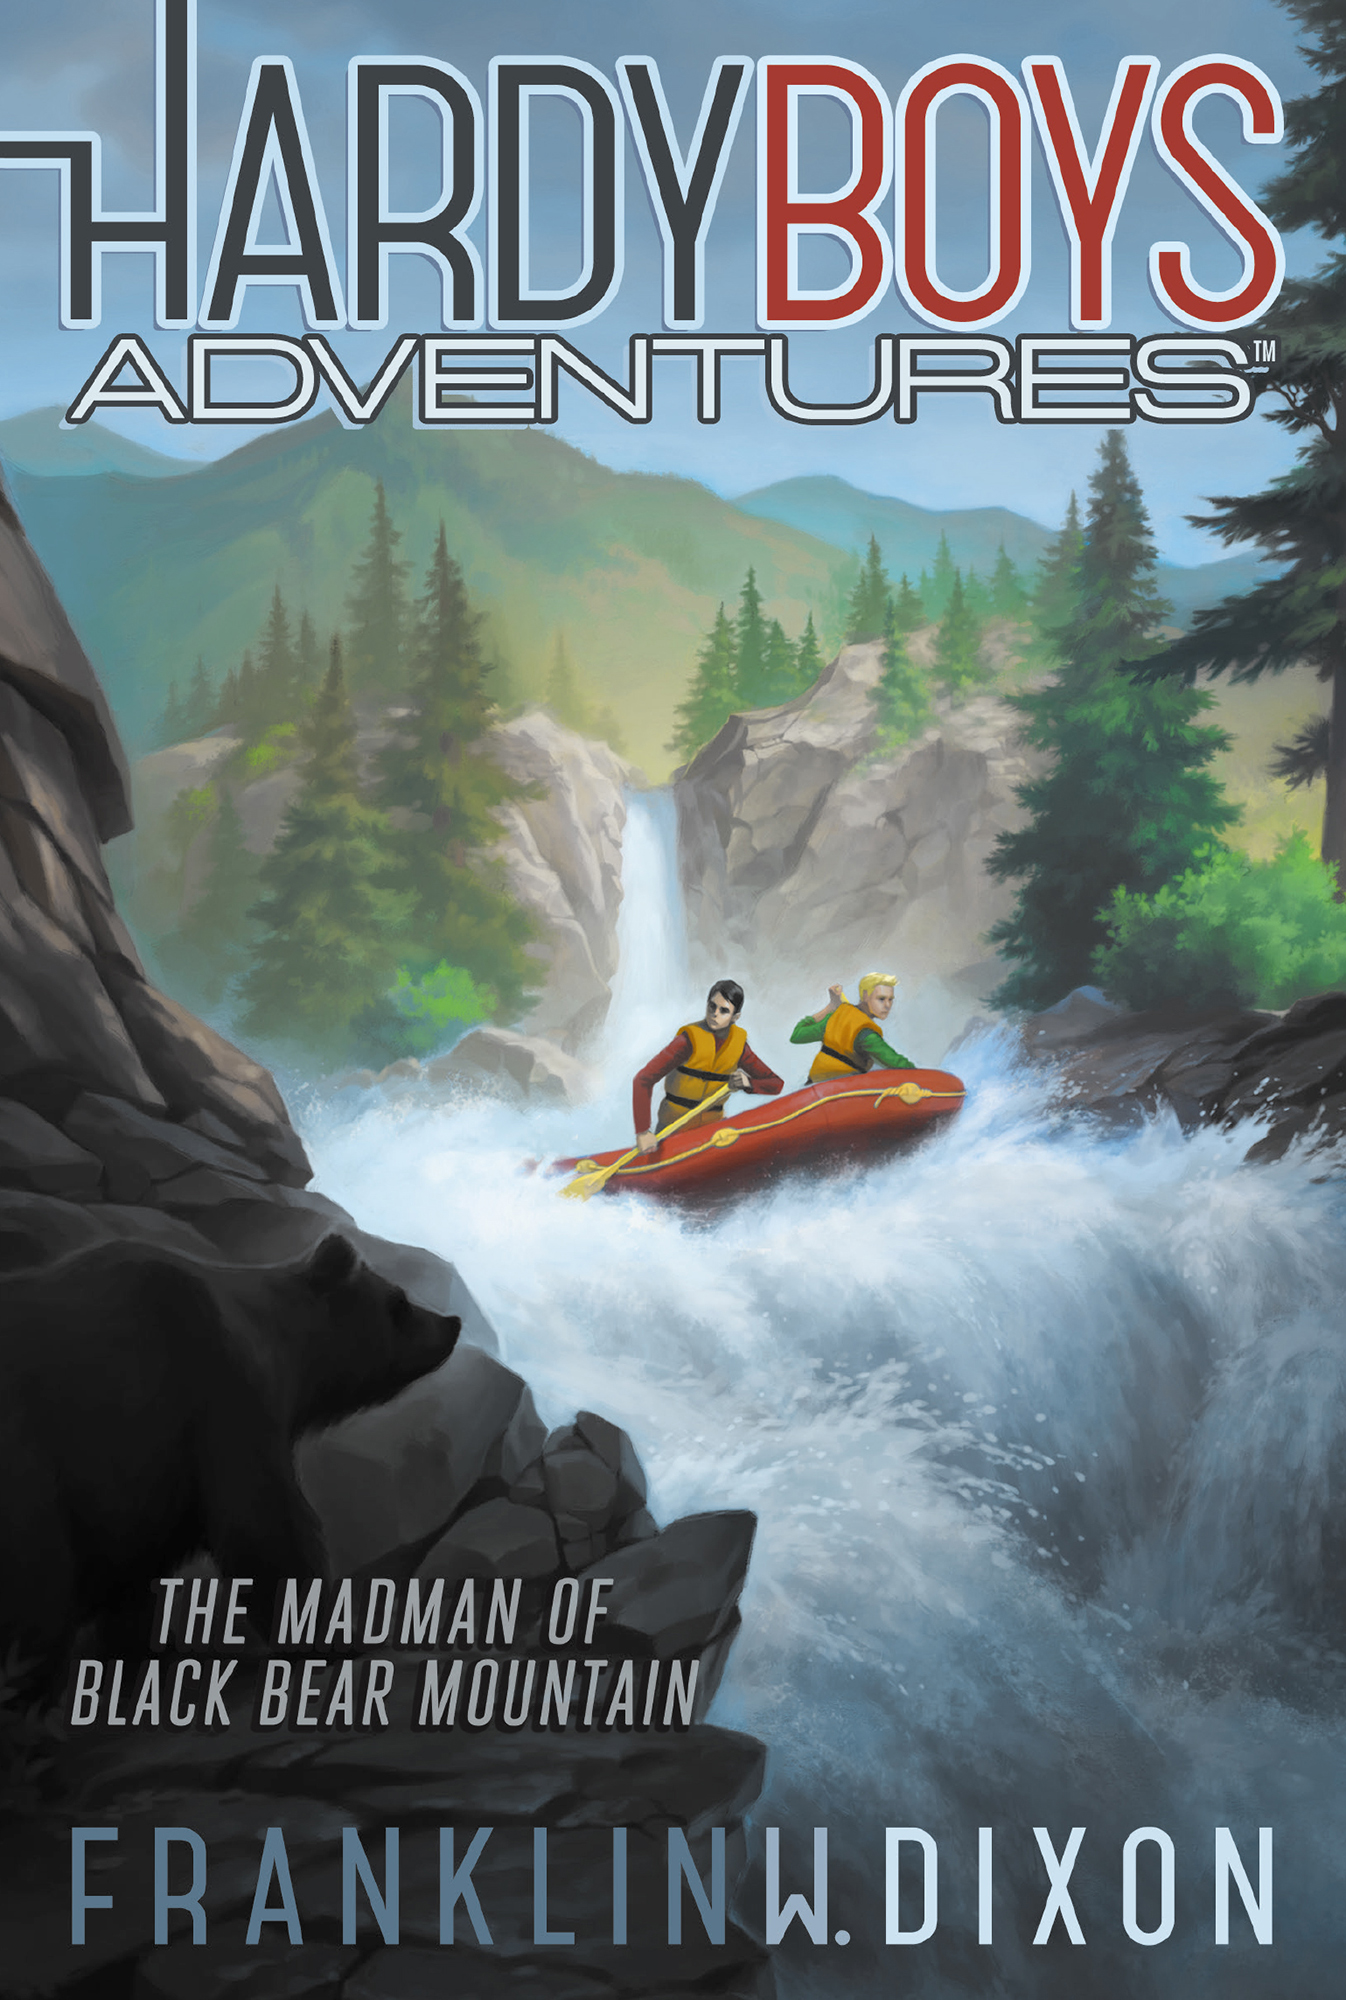 The Madman of Black Bear Mountain by Franklin W. Dixon